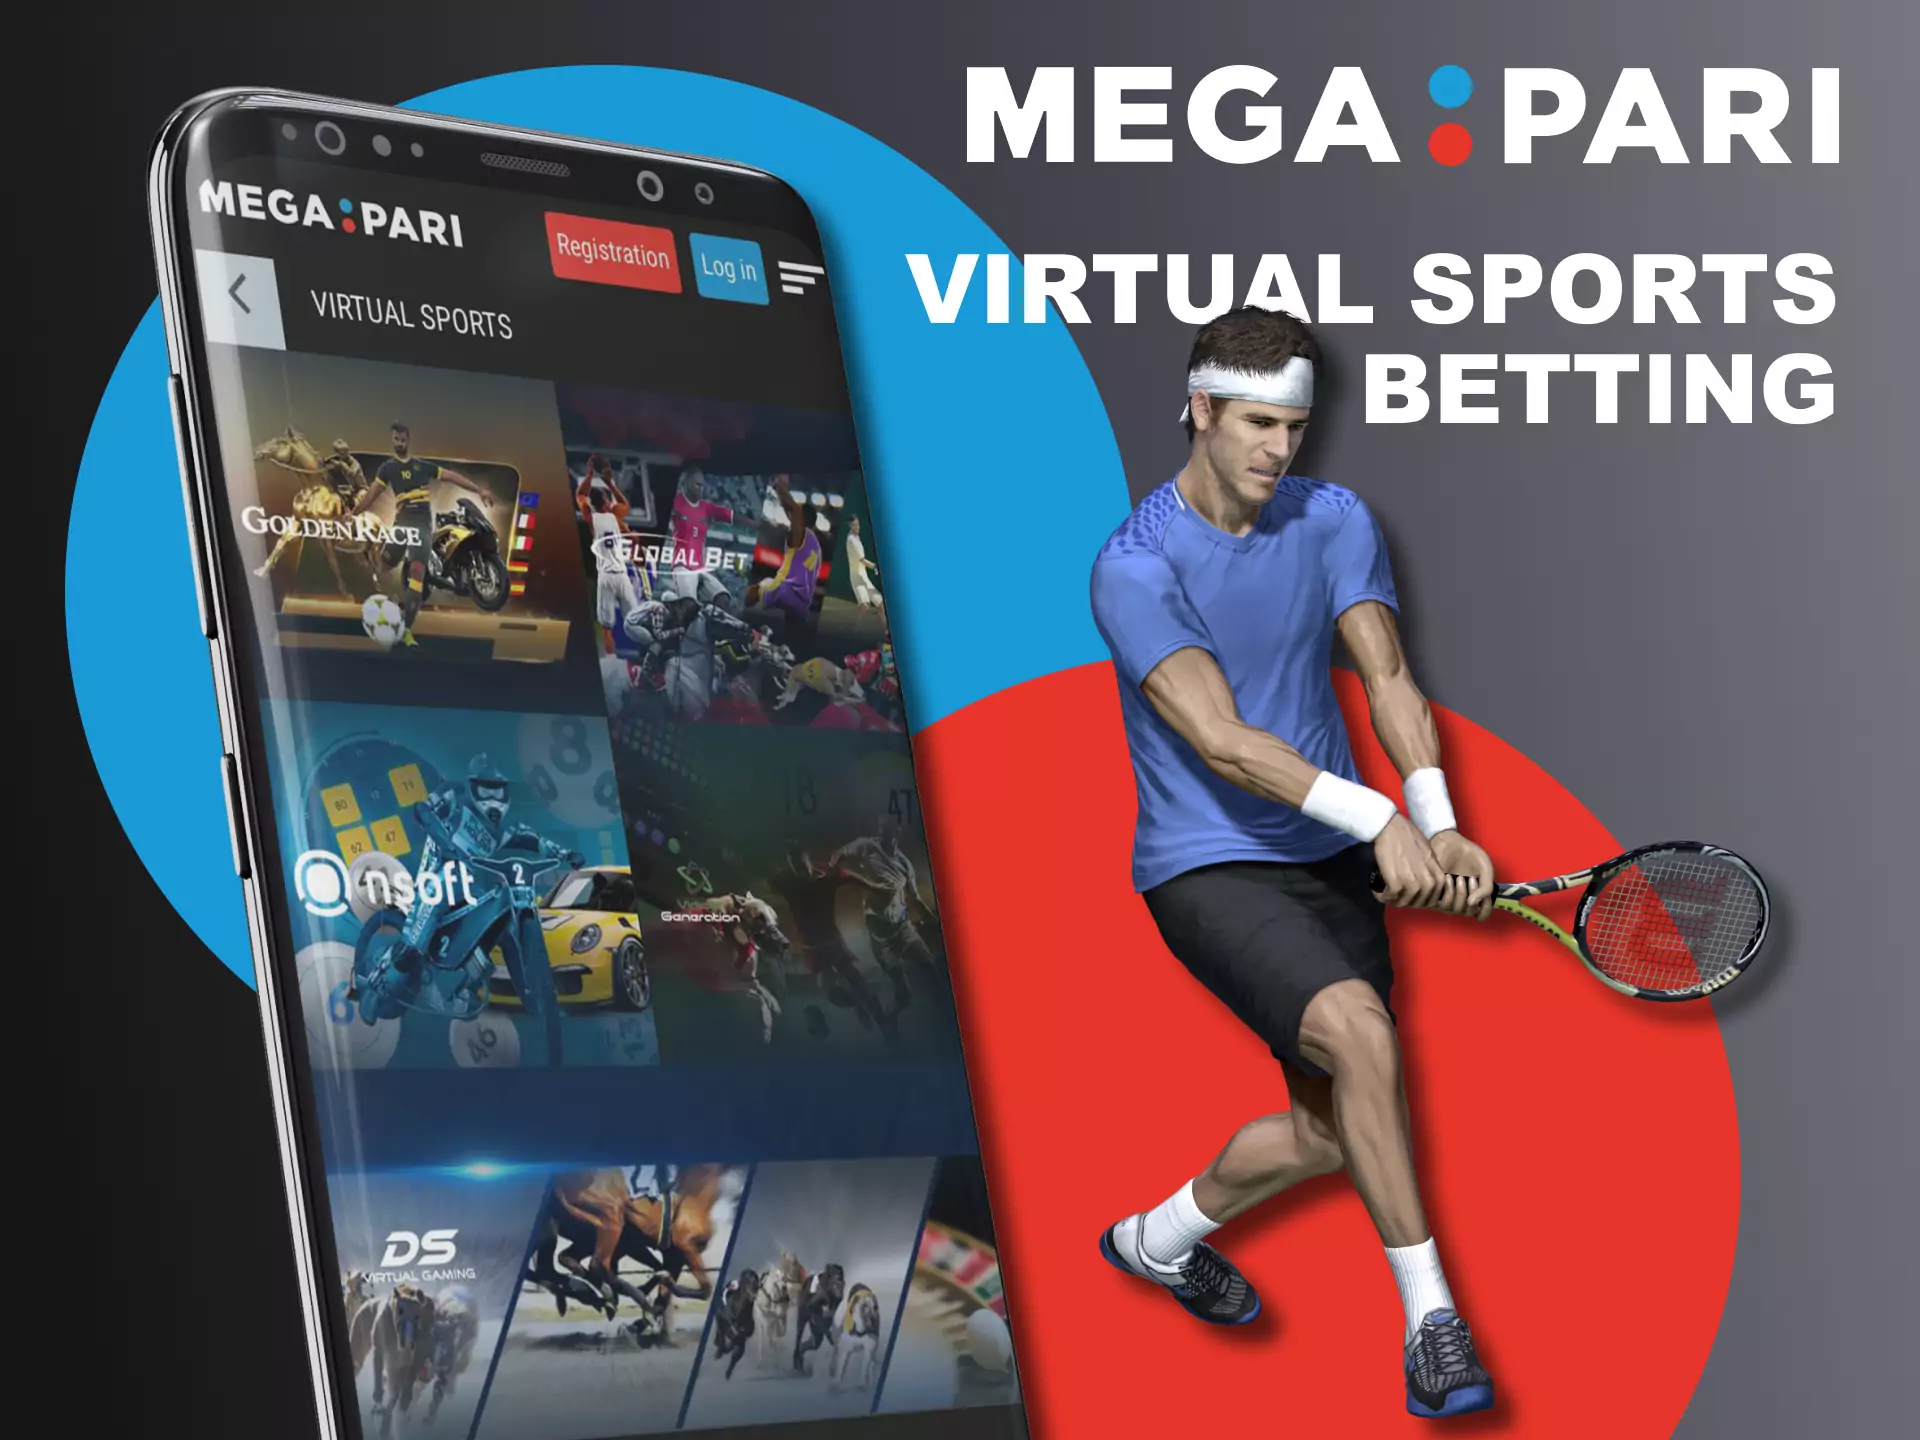 At Megapari, you can bet on any virtual sport.